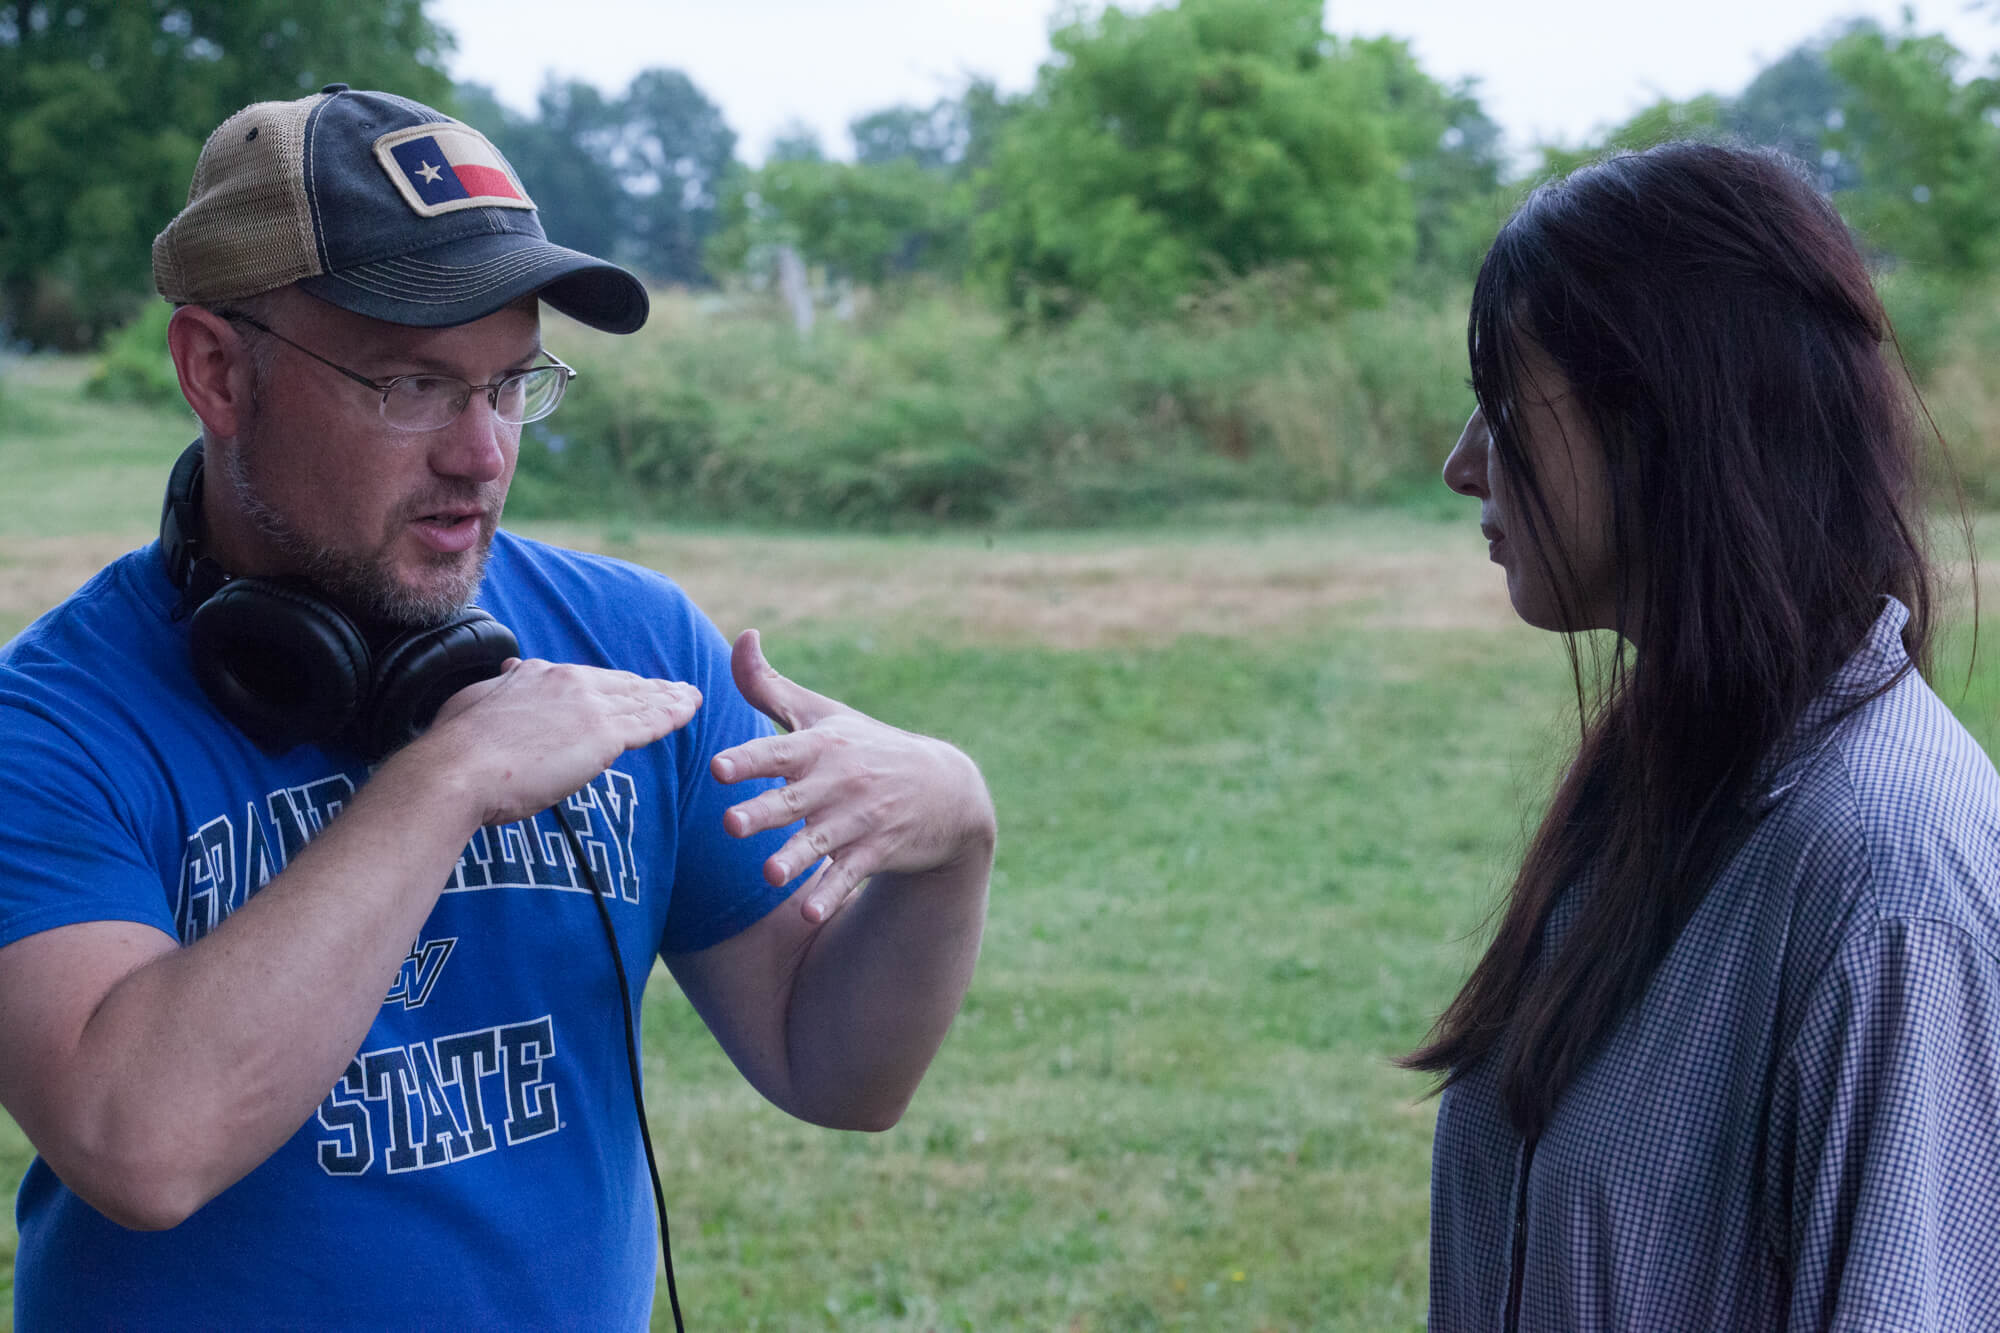 Director Aaron Shuelke working with an actress on the set of the Summer Film.